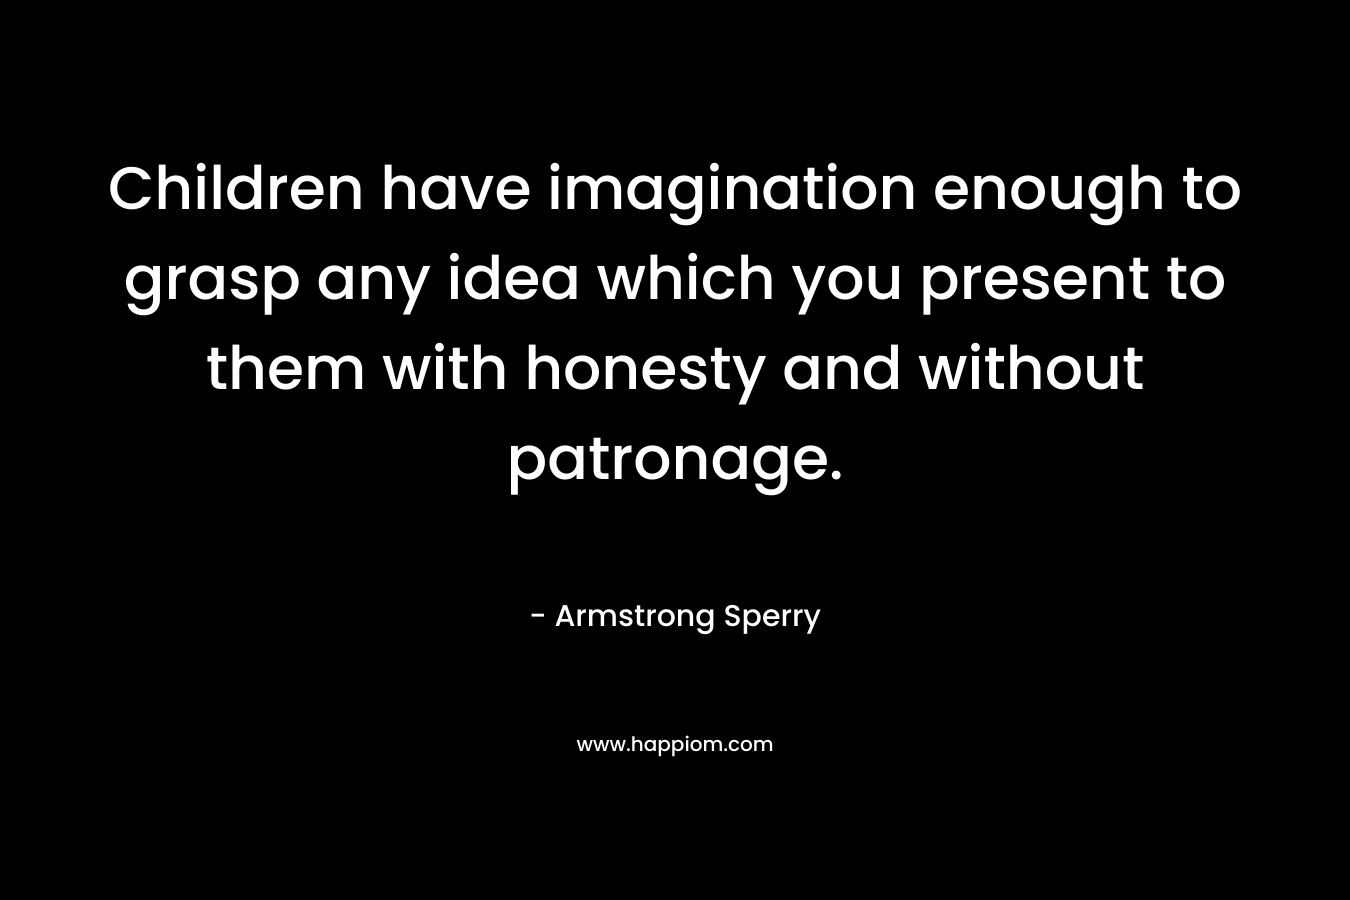 Children have imagination enough to grasp any idea which you present to them with honesty and without patronage. – Armstrong Sperry